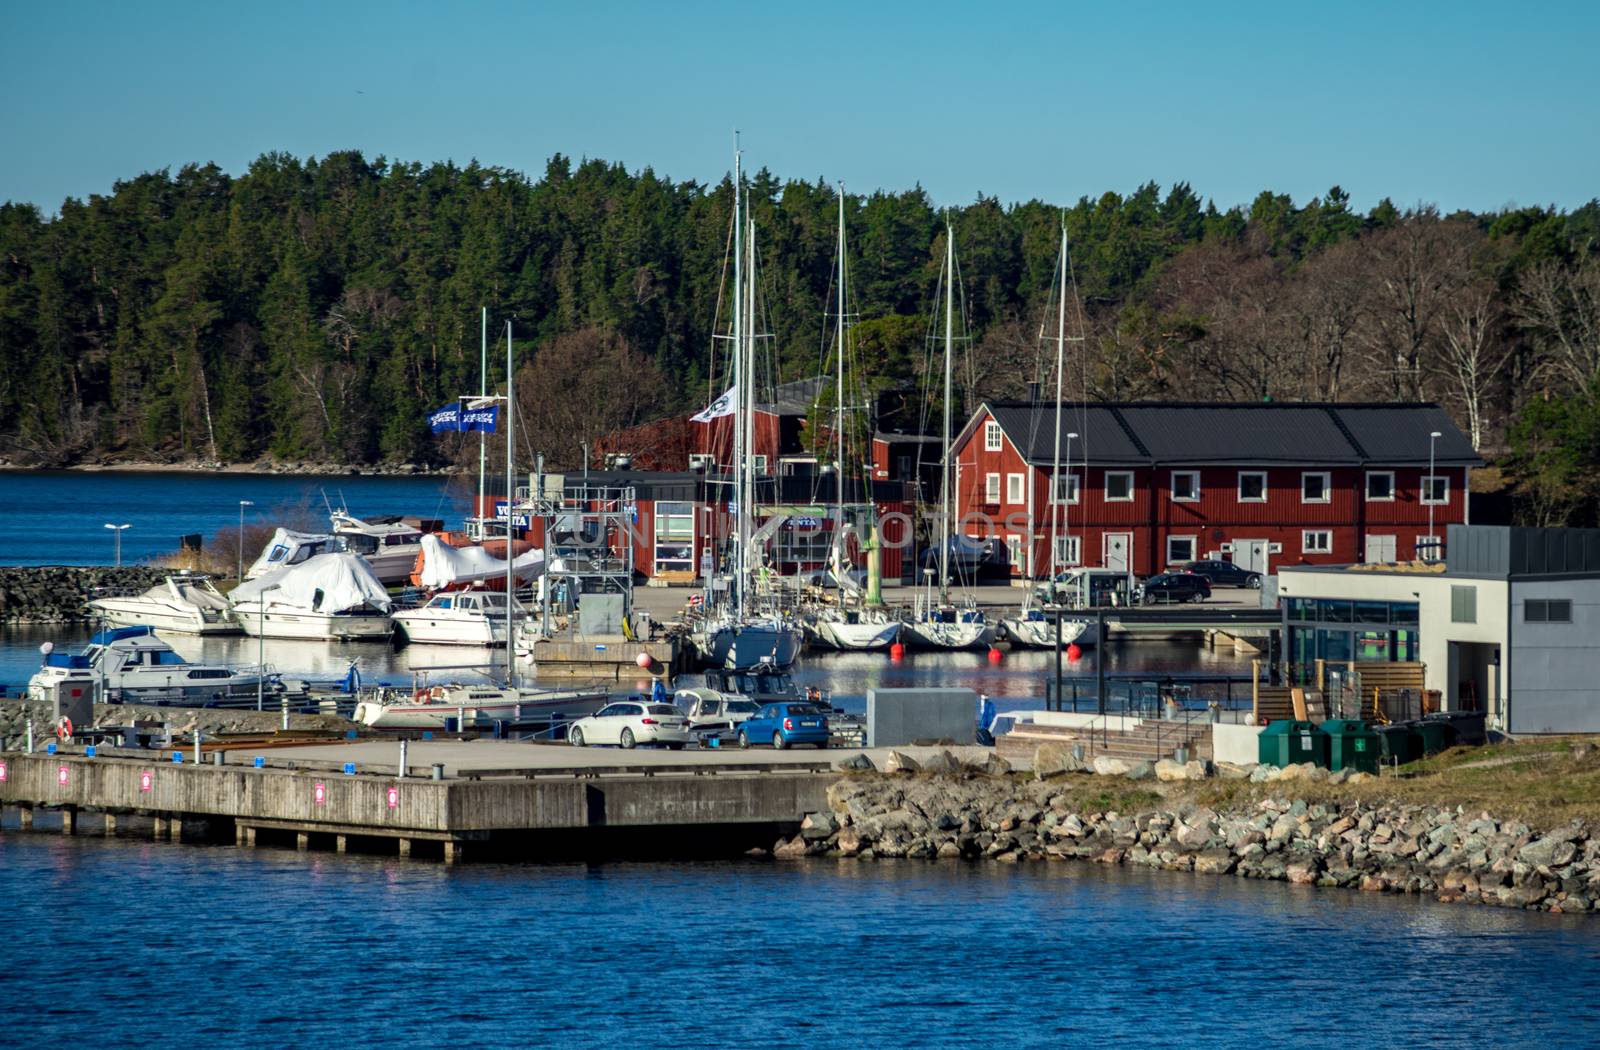 April 22, 2018, Stockholm Sweden. Marina for yachts on dwellings island of the Stockholm archipelago in the Baltic Sea in the early morning.